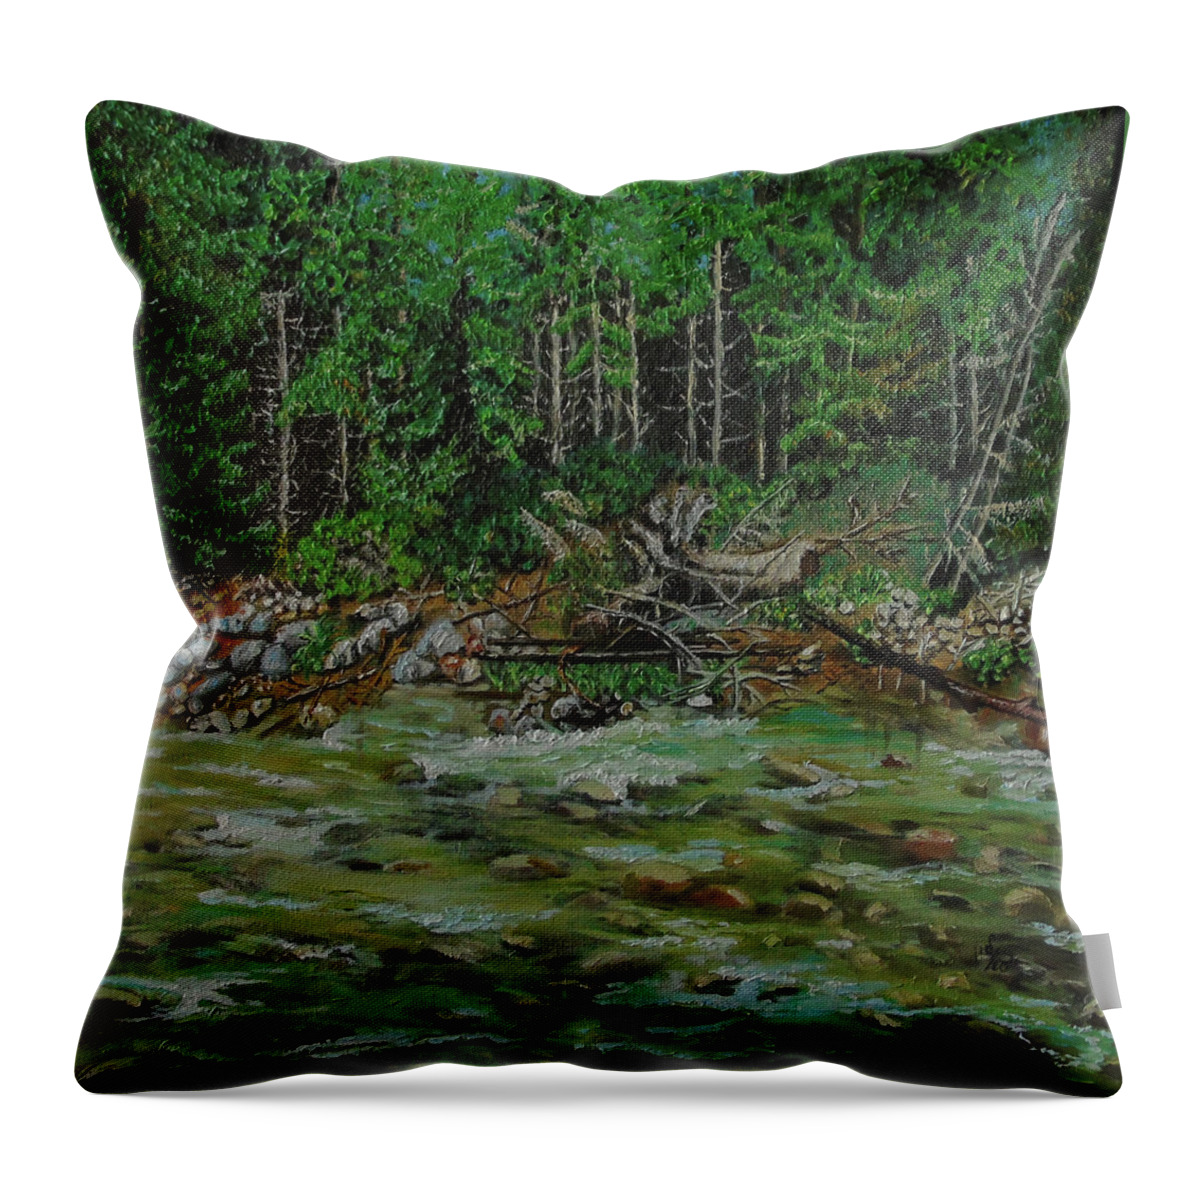 Landscape Oil Painting Natural Wild Peacefull Outside Wet Foam Stream By The River Reflections Water Aqua River Sand Modern Comb Shimmer Pine Needle In Bloom Deciduous Tree Forest Leaf Woodland Trees Tranquil Botanical Plant Realism Nature Floral Rocks Stones Mysterious Pristine Wild Sunlight Sunny Summer Vacations Sky Travel Poland Explore Stone Texture Derail Focus On Stone Scenery Throw Pillow featuring the painting River by Maria Woithofer